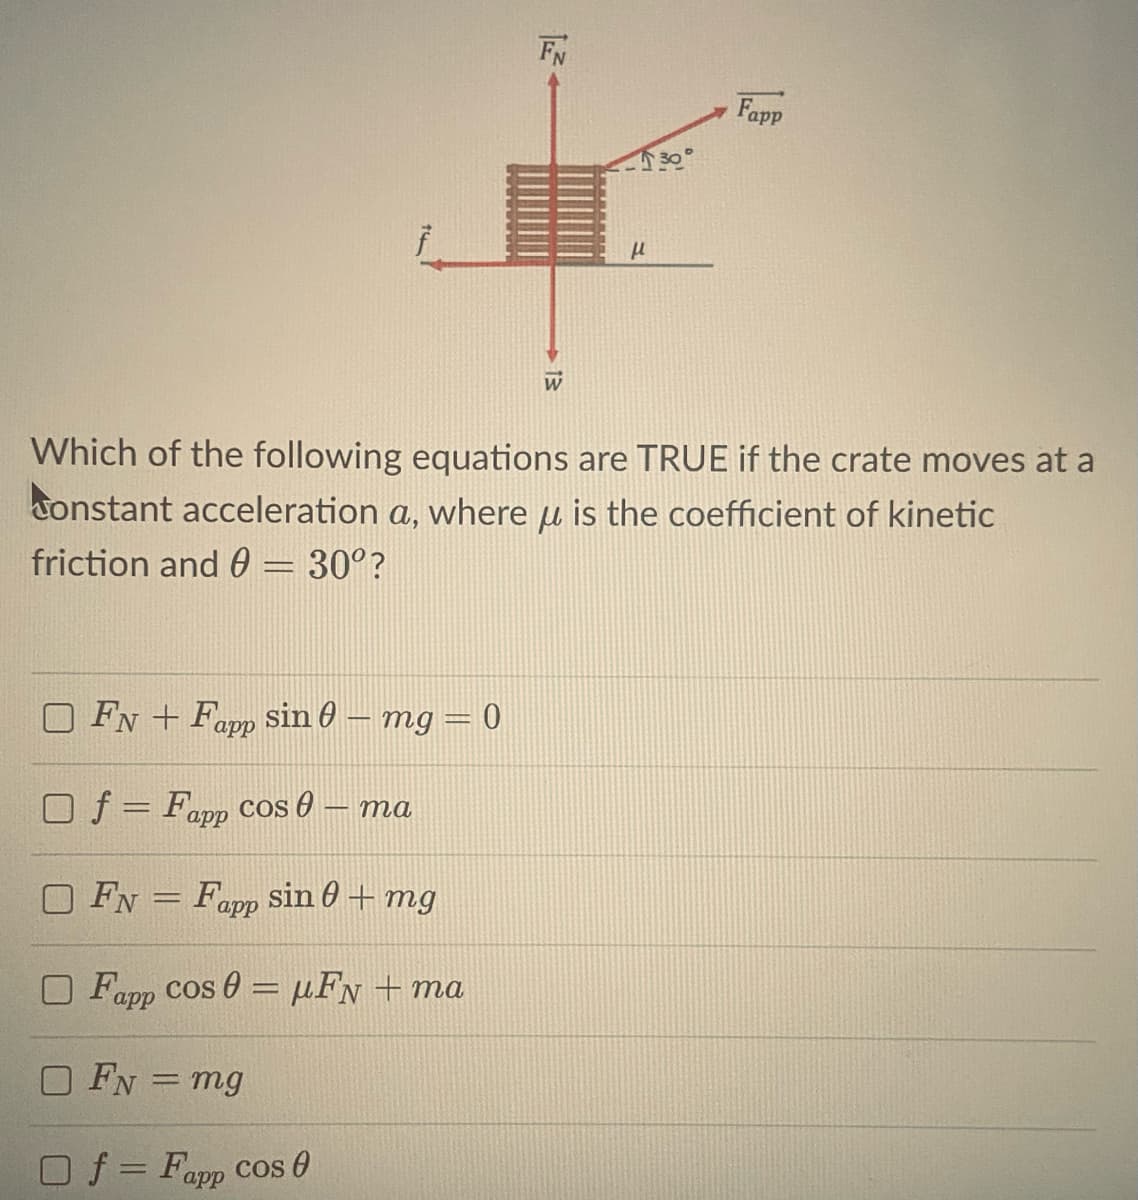 FN
Fapp
Which of the following equations are TRUE if the crate moves at a
tonstant acceleration a, where u is the coefficient of kinetic
friction and 0 = 30°?
FN + Fapp sin 0 – mg = 0
Of = Fapp Ccos 0 – ma
FN = Fapp sin 0 + mg
O Fapp cos 0 = µFN + ma
O FN = mg
Of = Fapp Cos 0
